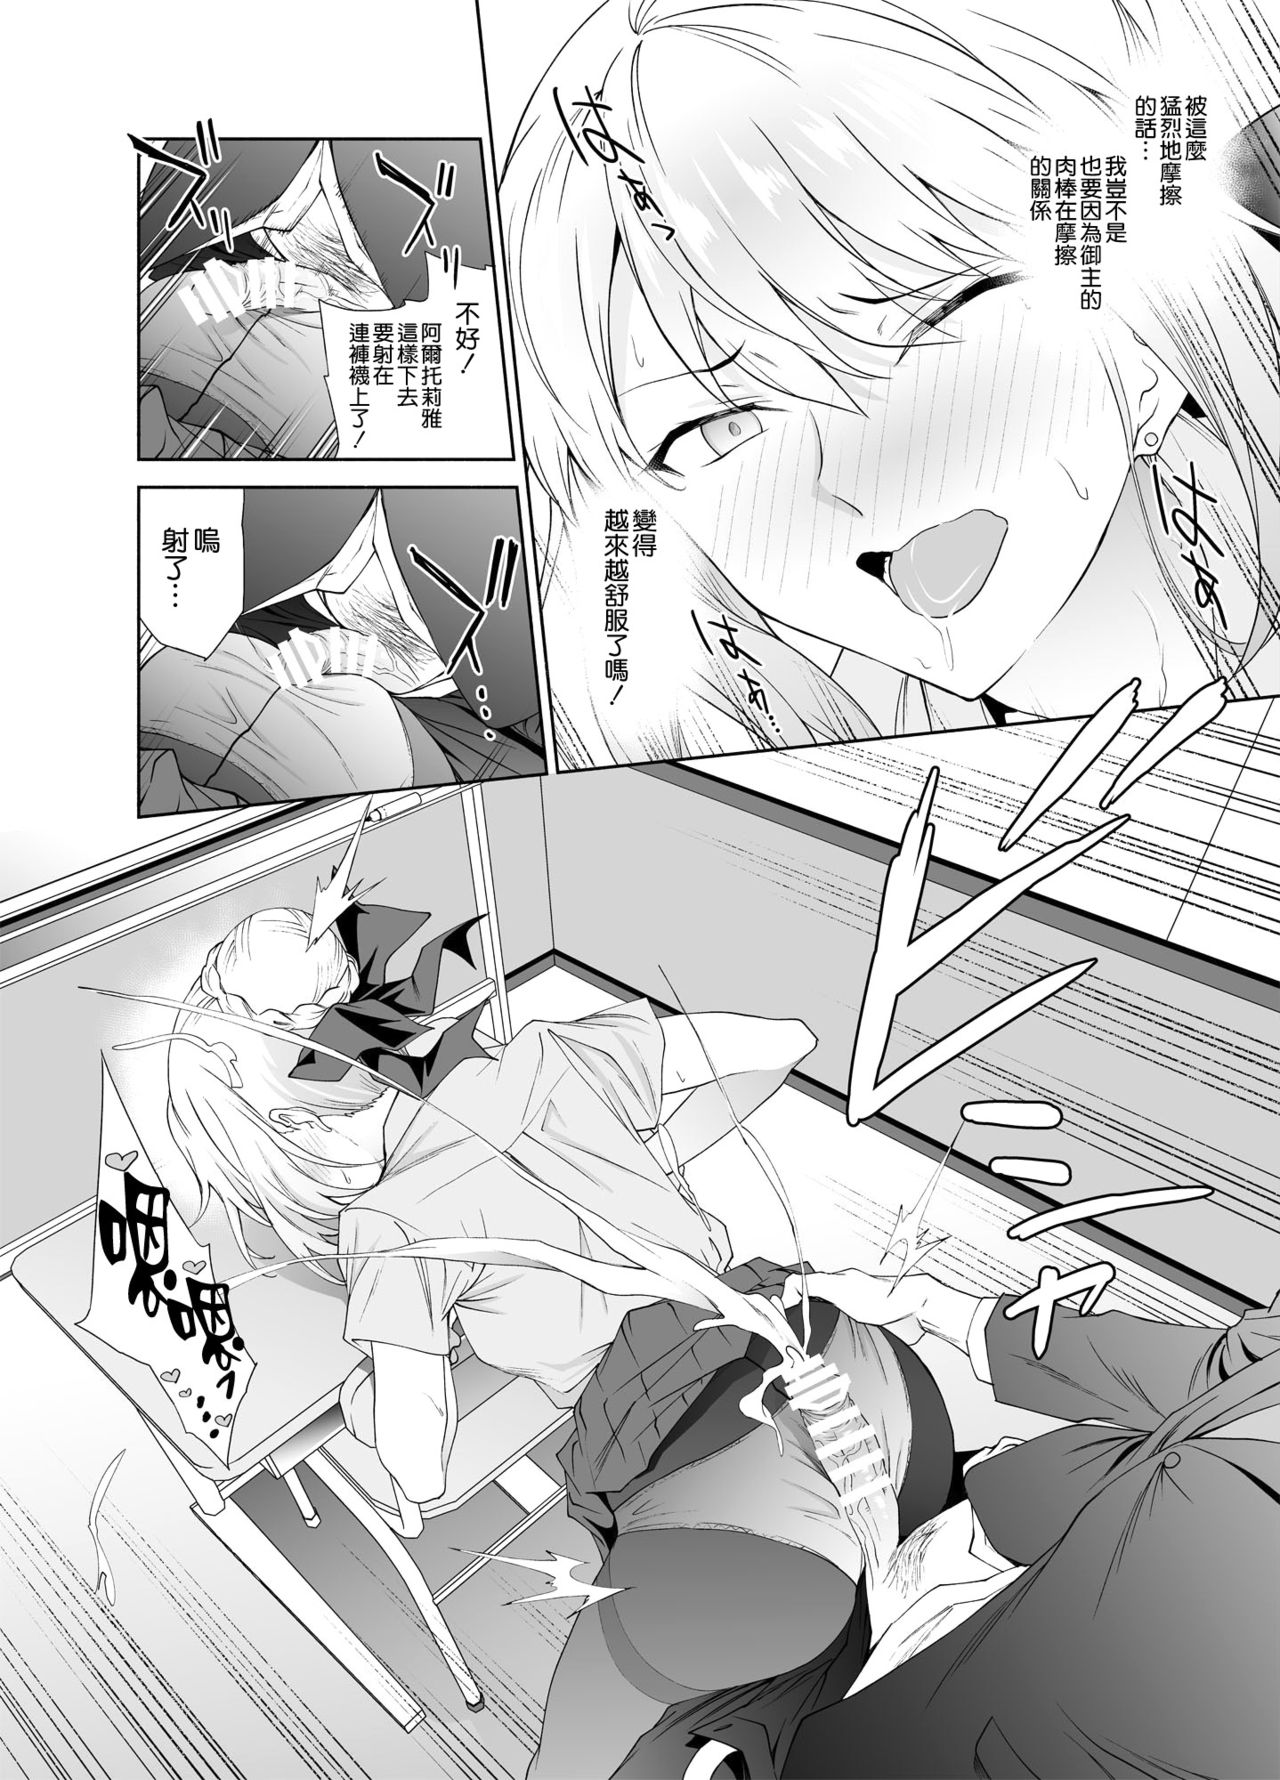 [EXTENDED PART (Endo Yoshiki)] JK Arturia [Alter] (Fate/Grand Order) [Chinese] [空気系☆漢化] [Digital] page 12 full